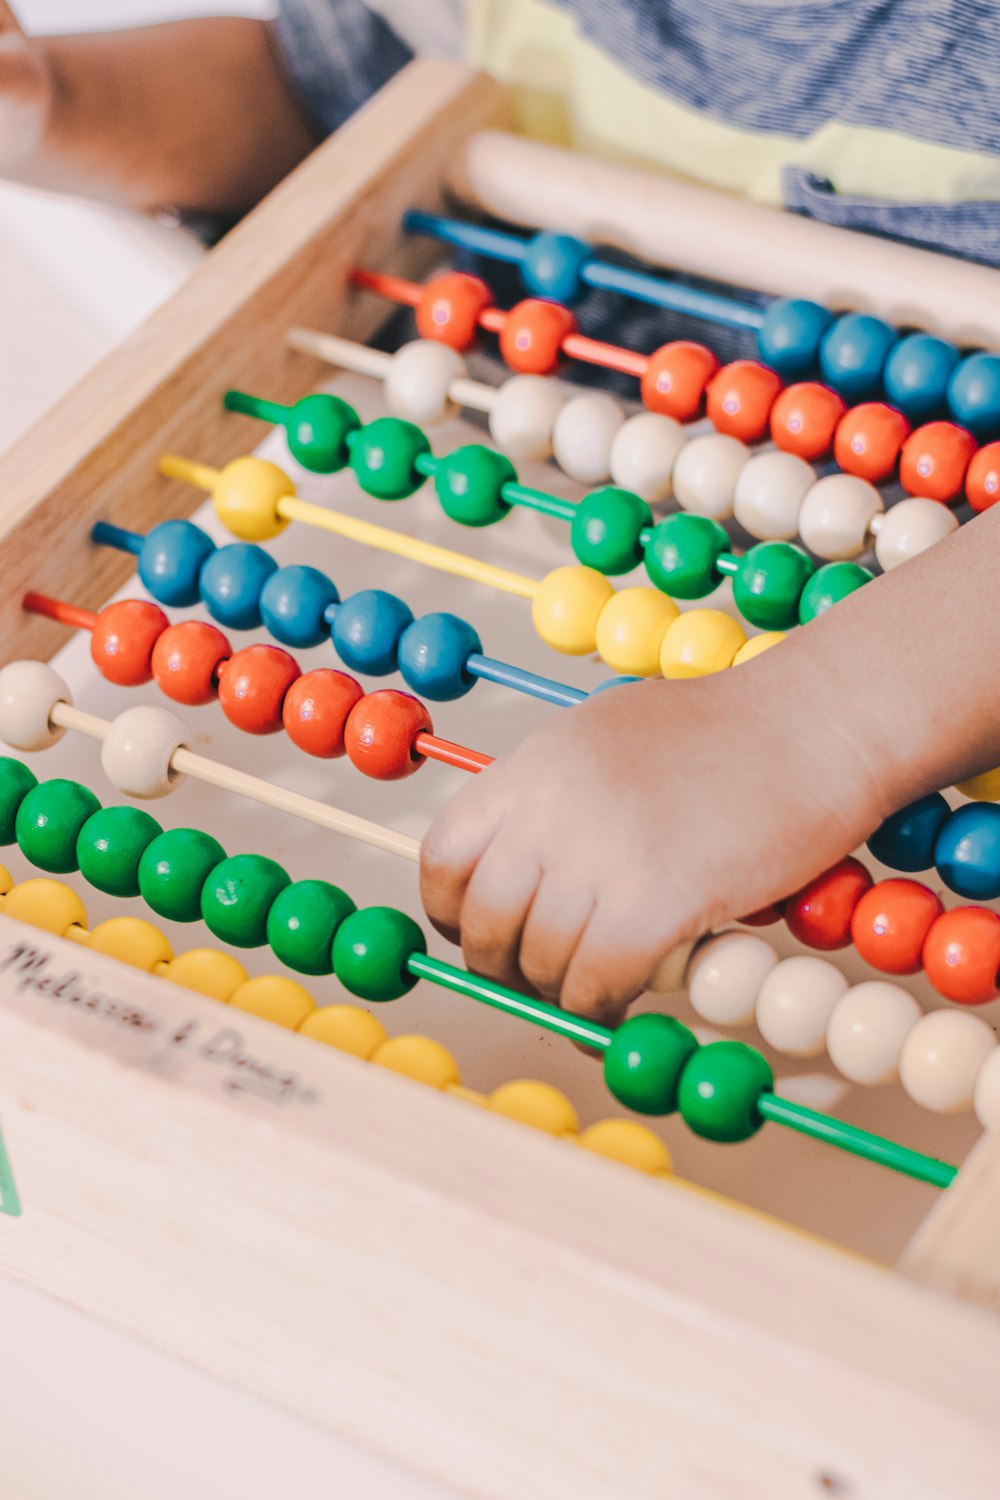 person holding red and blue abacus